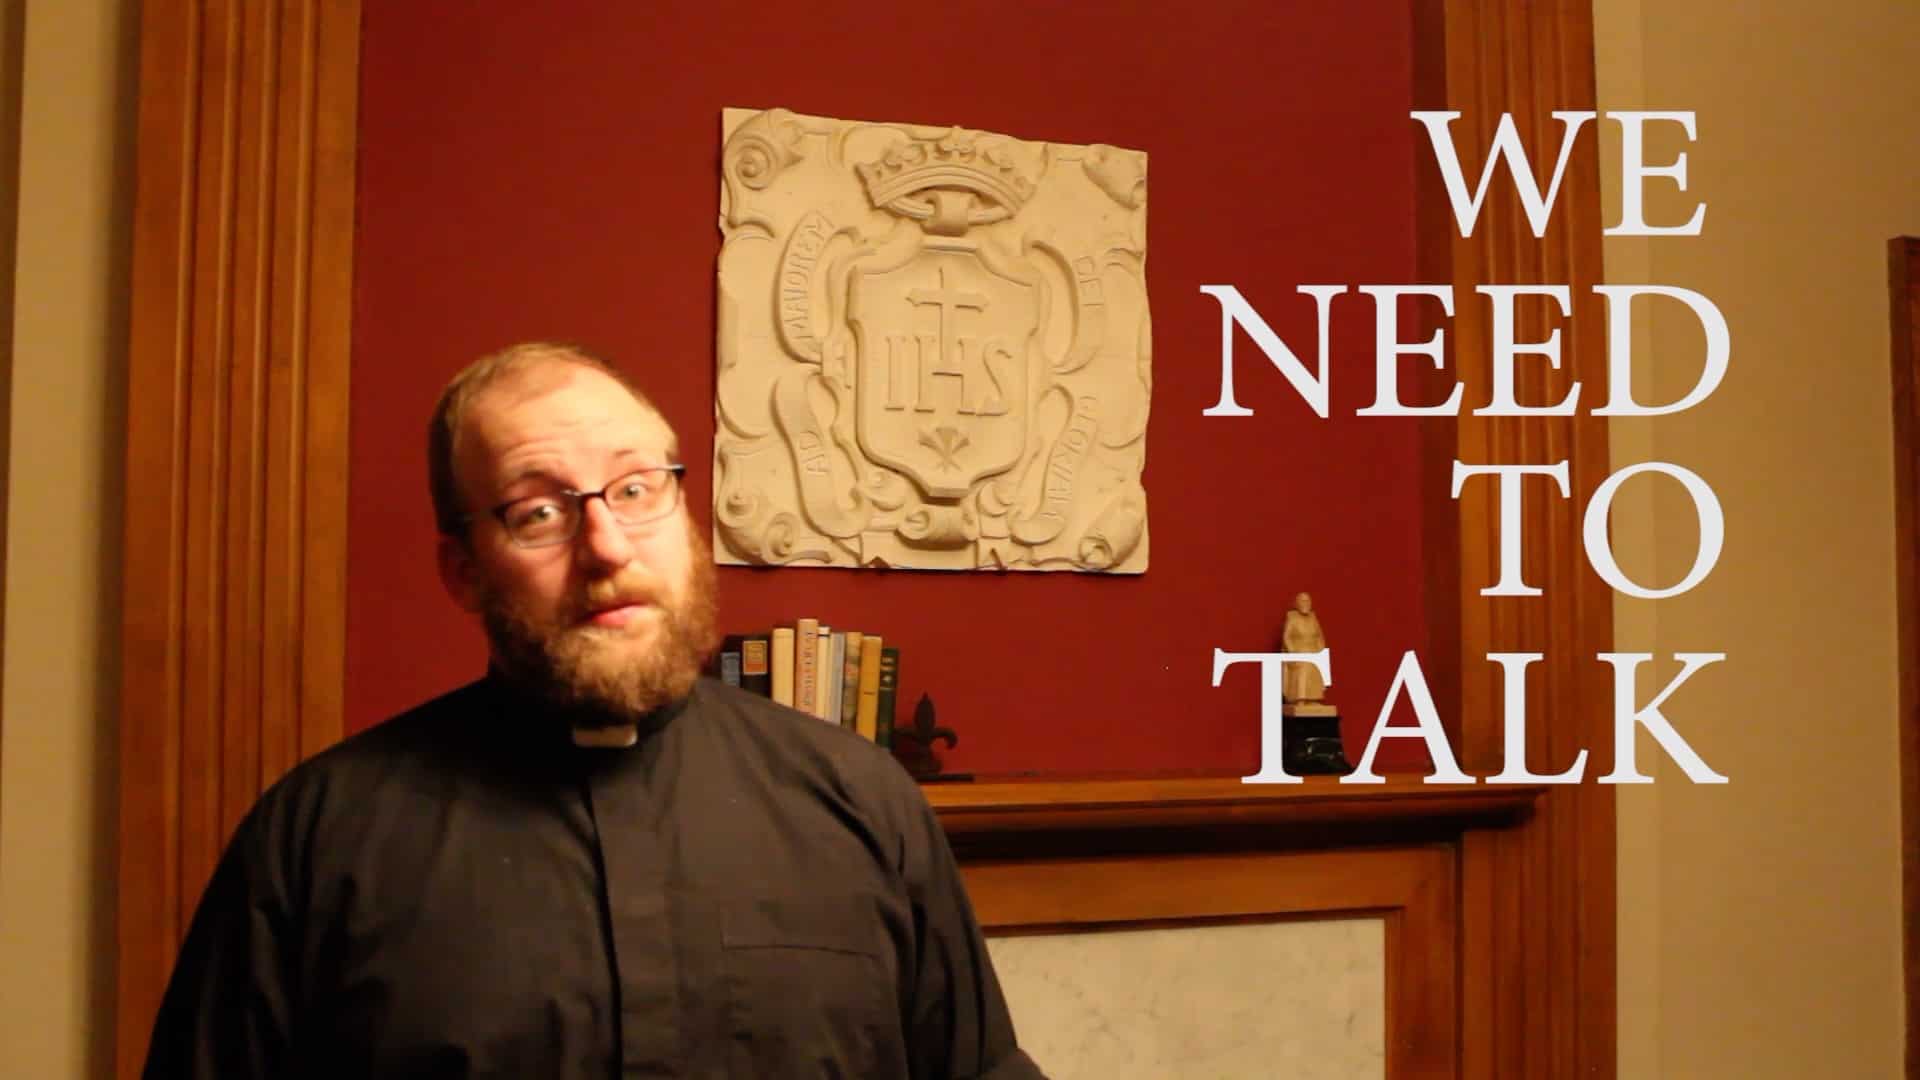 One-Minute Homily: “We Need to Talk”